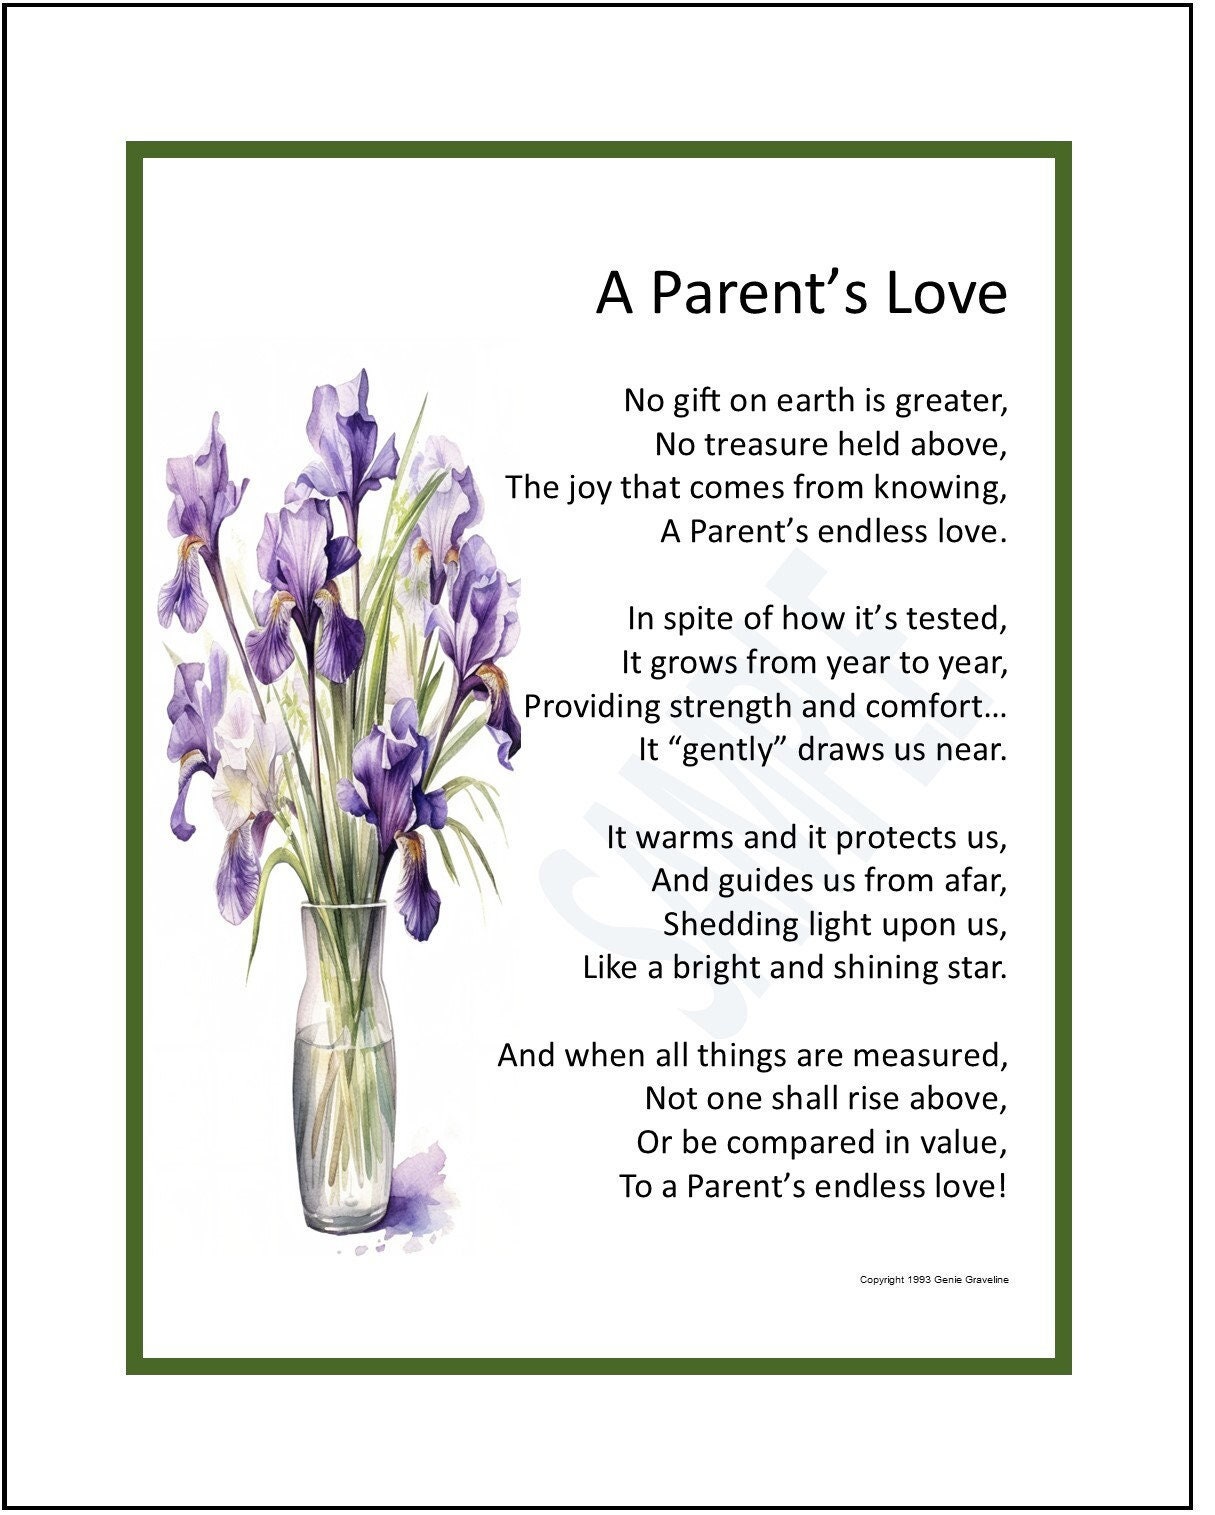 Genie's Poems Mom and Dad Poem Print Saying Gift, Thank You Mom Dad, Mom  Dad Appreciation, Gift Present Poem For Parents Anniversary